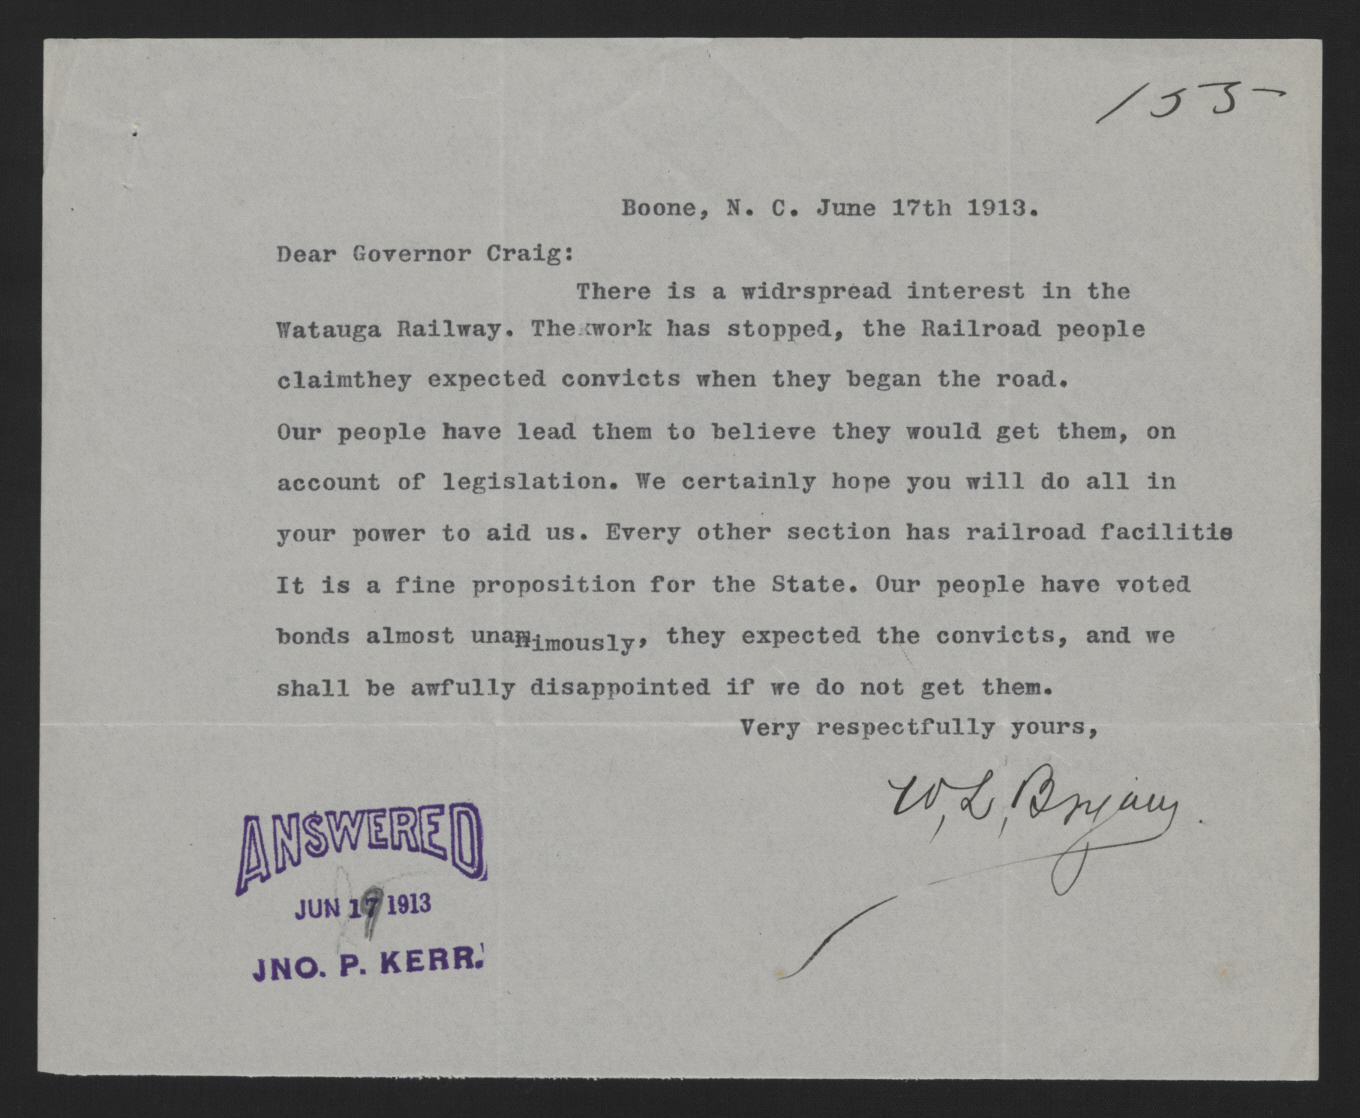 Letter from Bryan to Craig, June 17, 1913